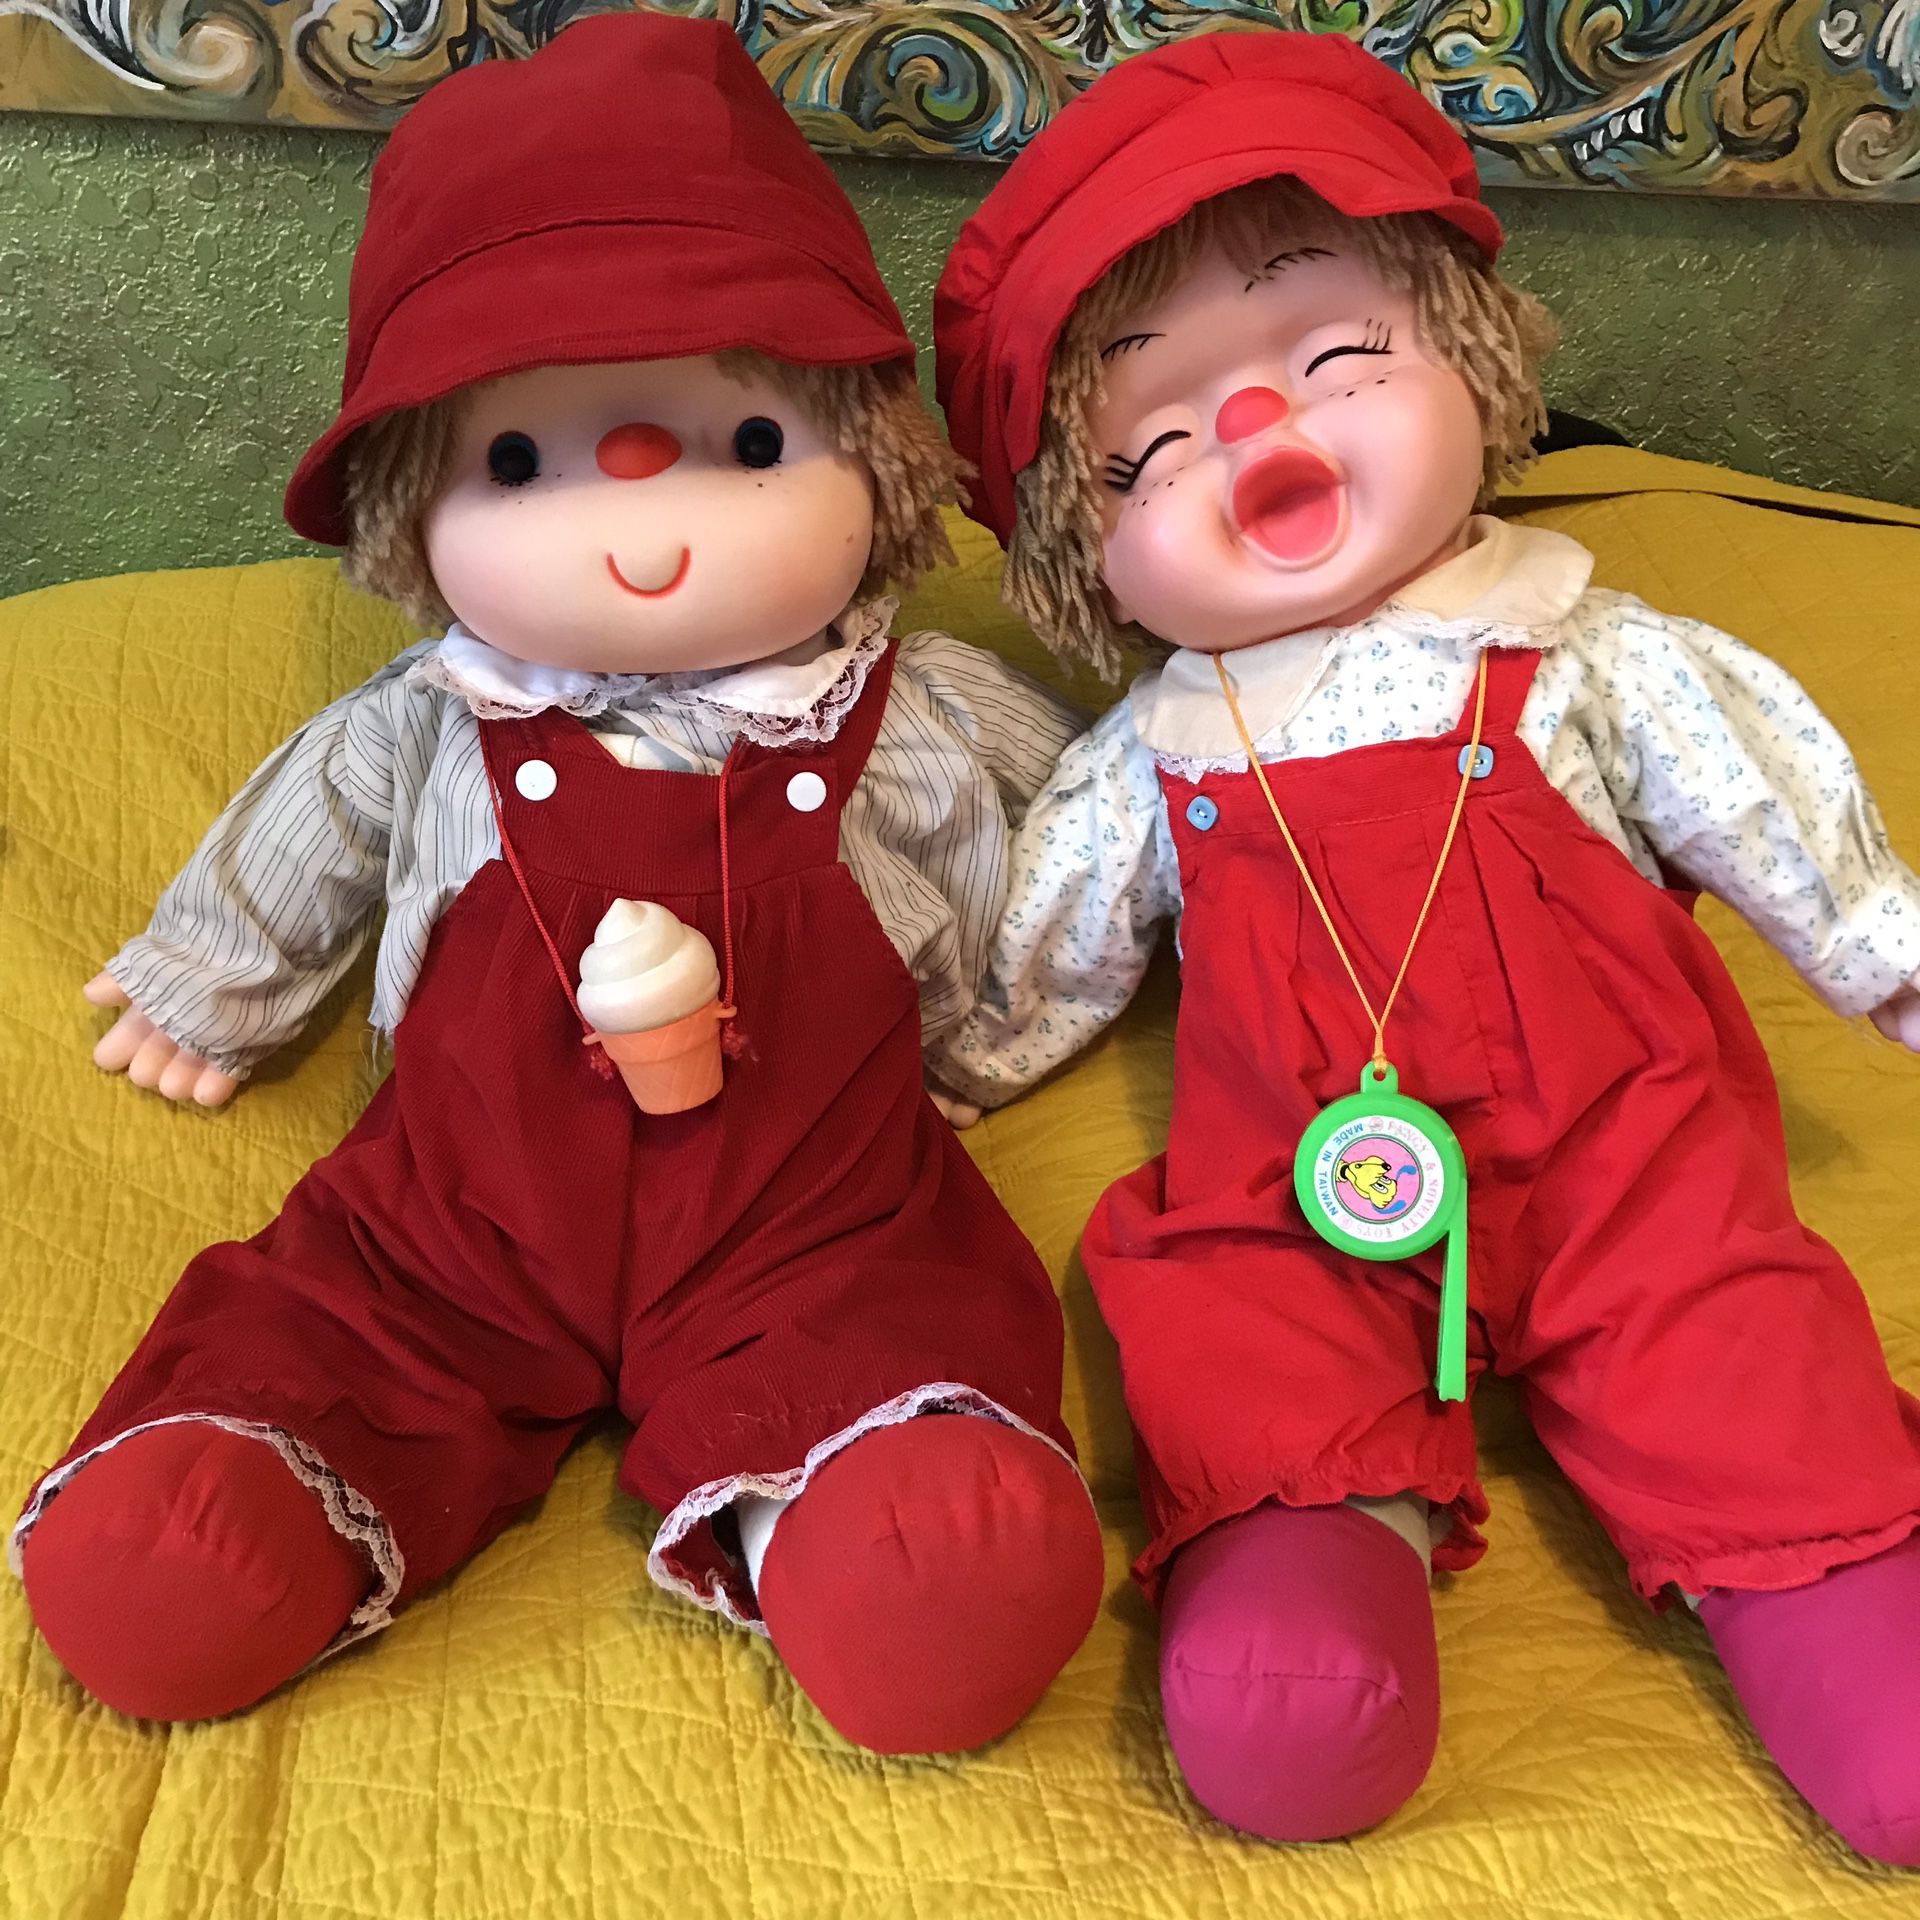 Vintage collectible Ice Cream Dolls 1980’s lot Of 2 Boys EUC Rare Red Overalls jumbo size